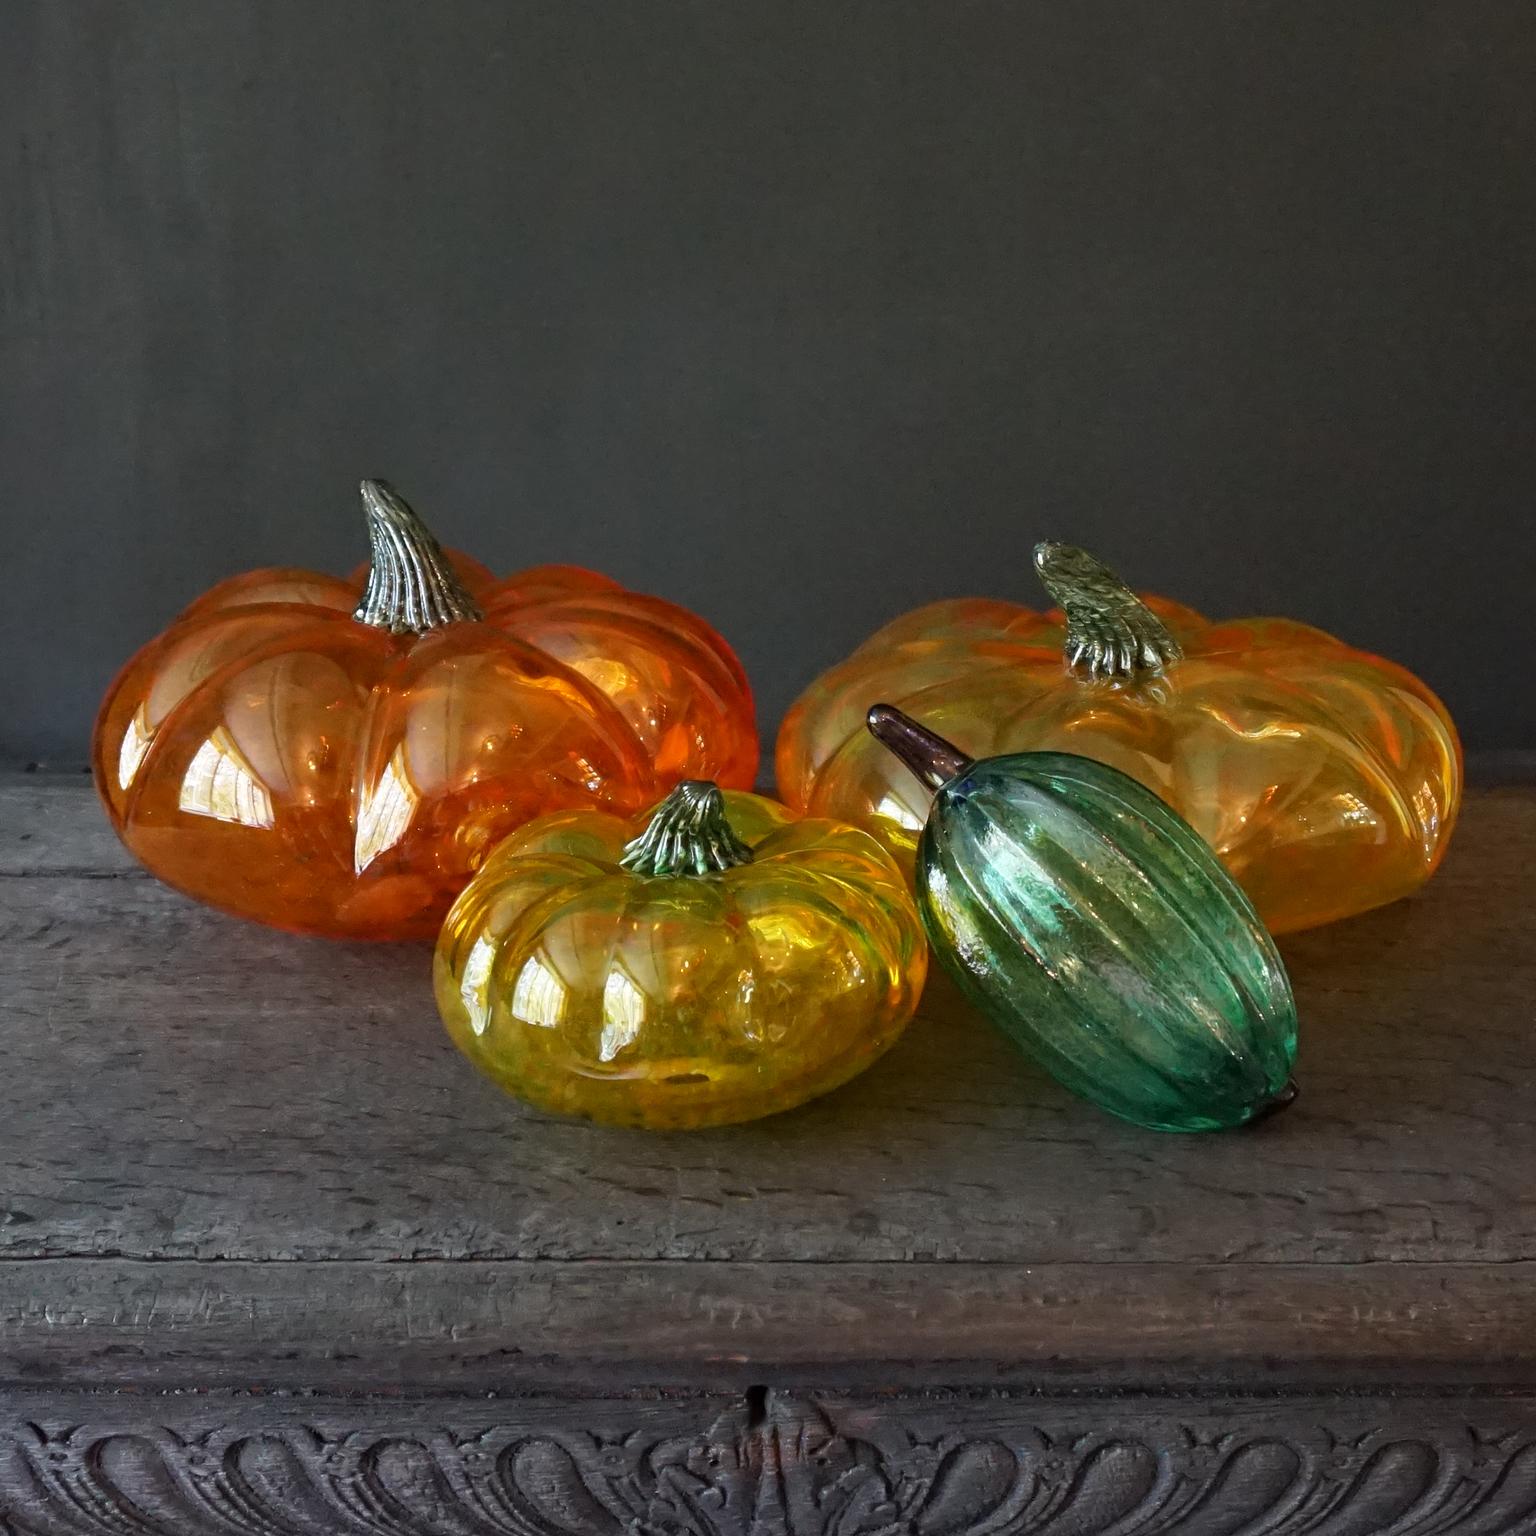 Fantastic vintage 1970s-1980s pumpkins, also know as gourds, in Italian Murano and Swedisch Kosta Boda heavy mouth blown glass. 
Large life size pumpkins in orange, yellow and green glass.
The three large orange-yellowish pumpkins are very pretty